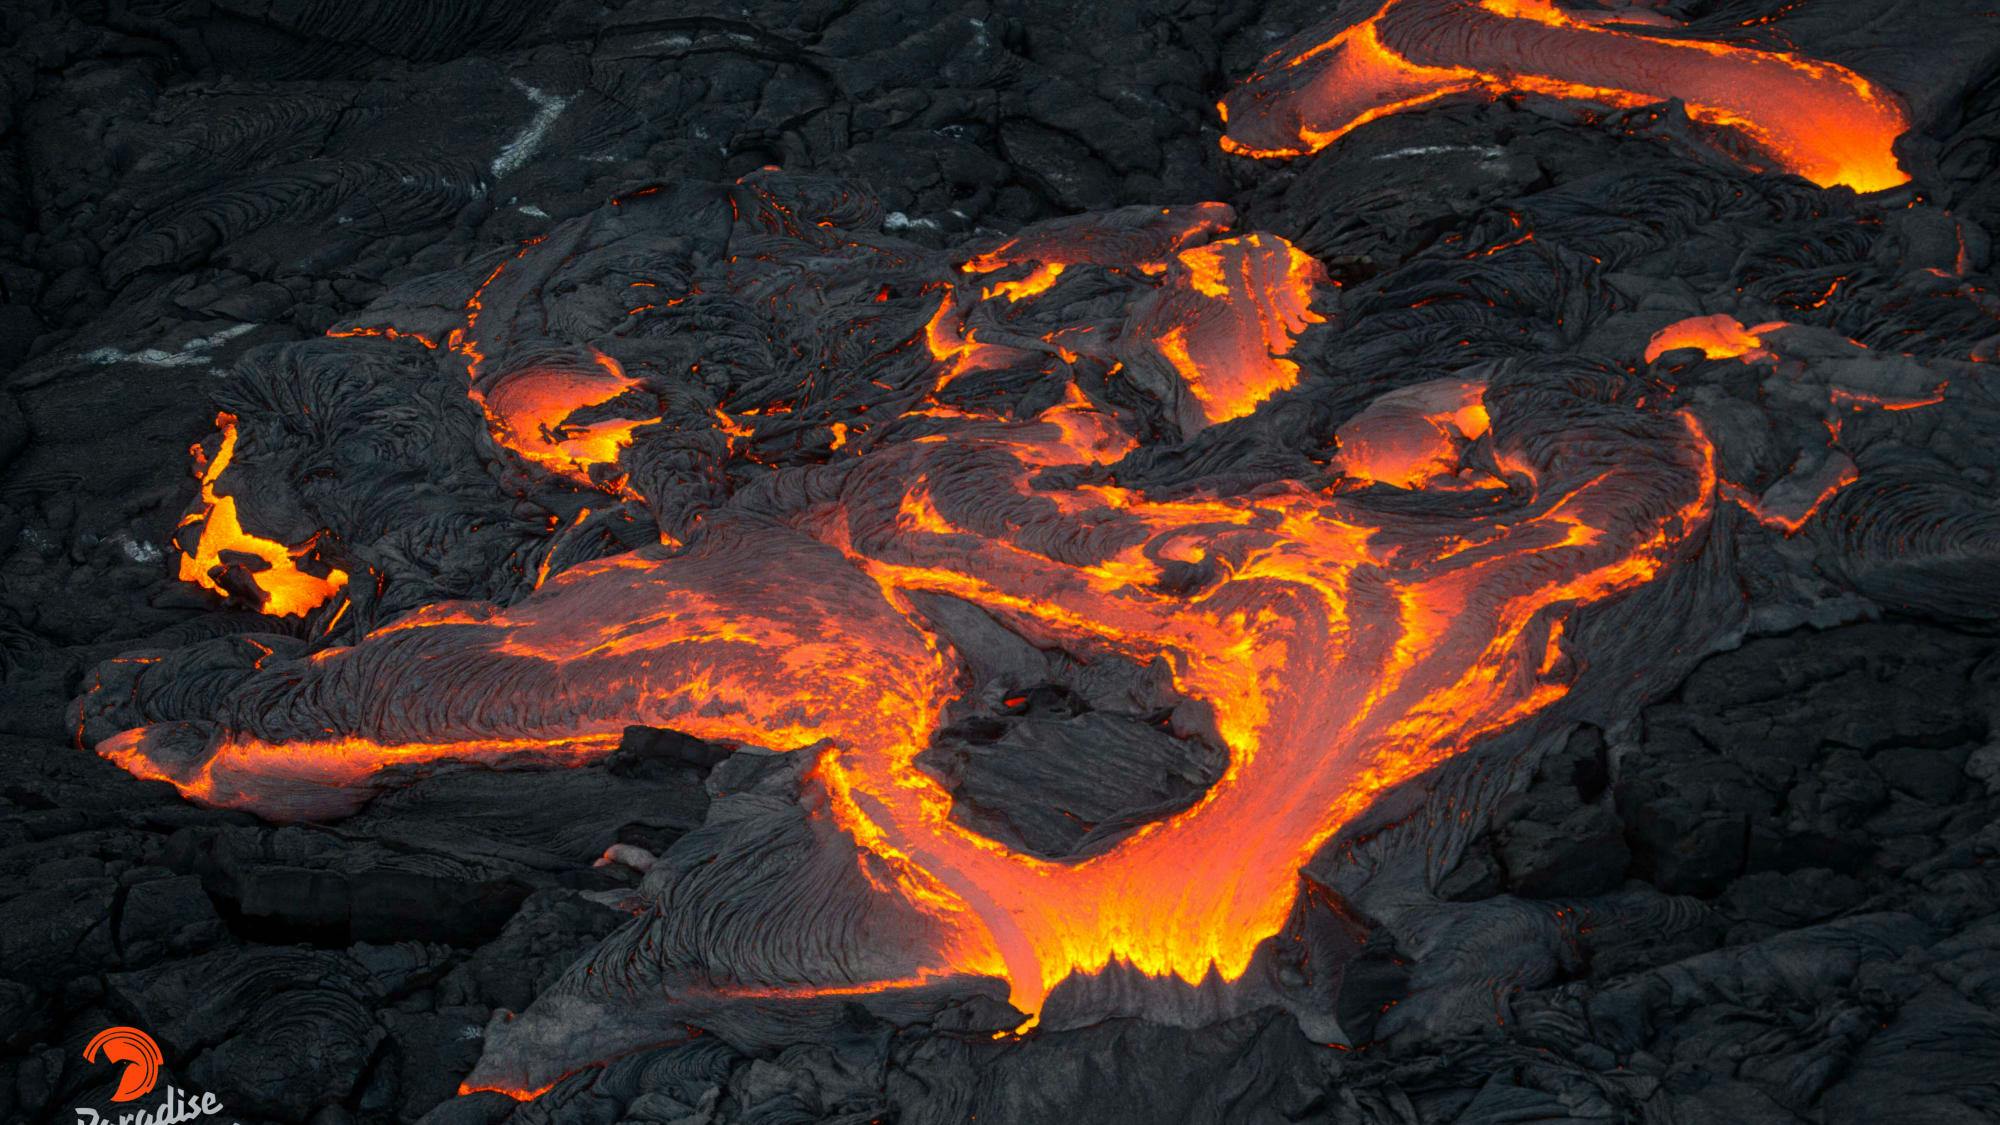 Lava pools from a volcano